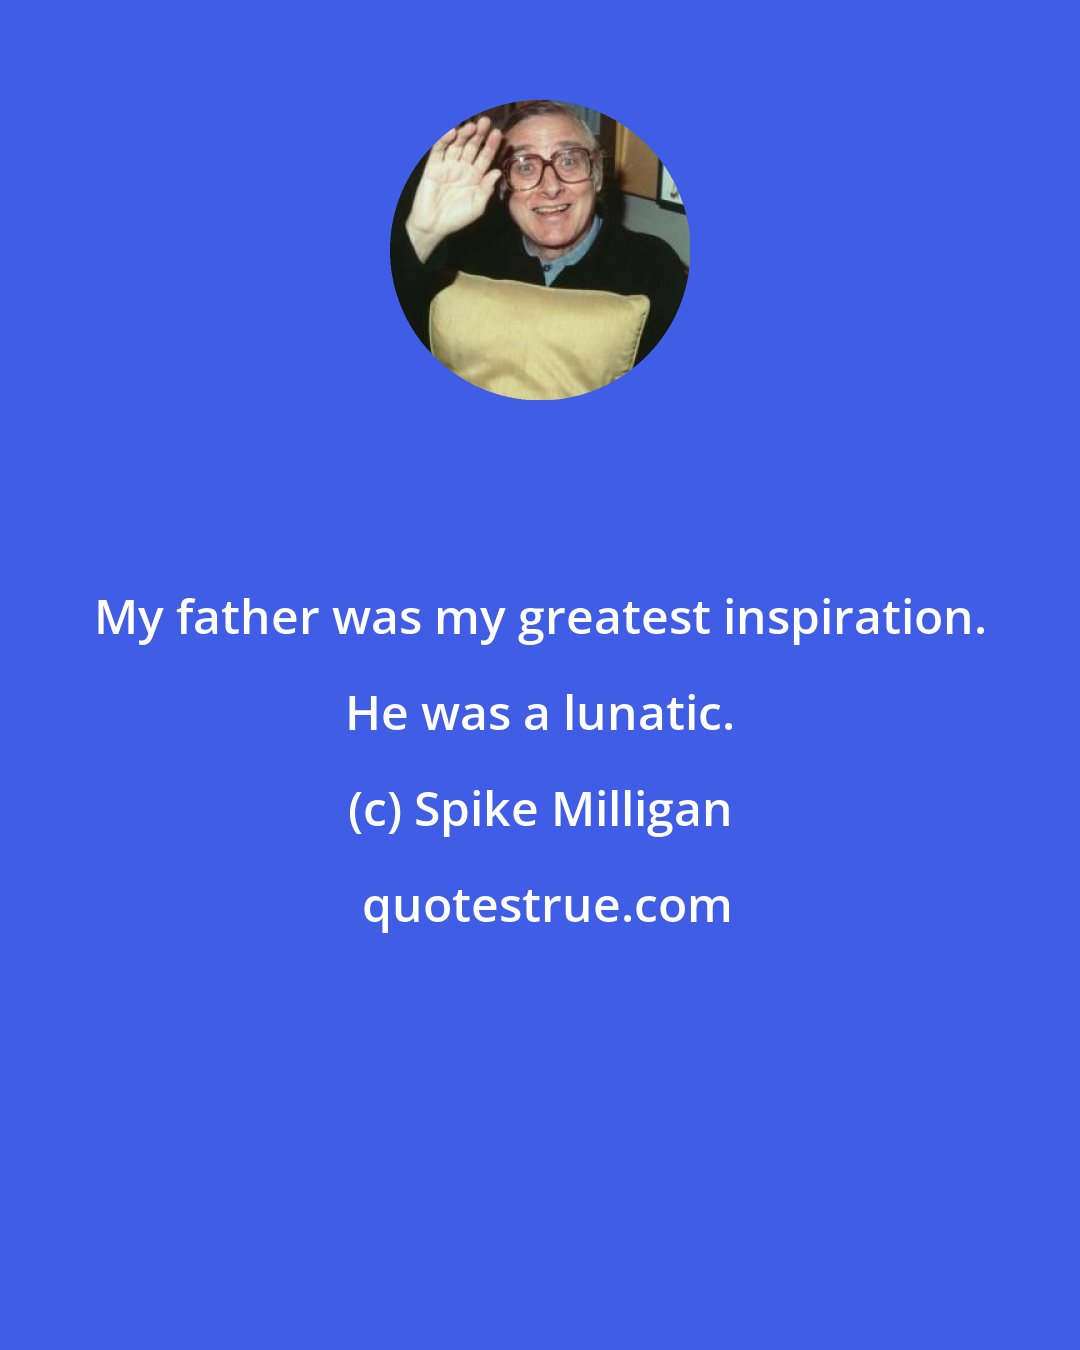 Spike Milligan: My father was my greatest inspiration. He was a lunatic.